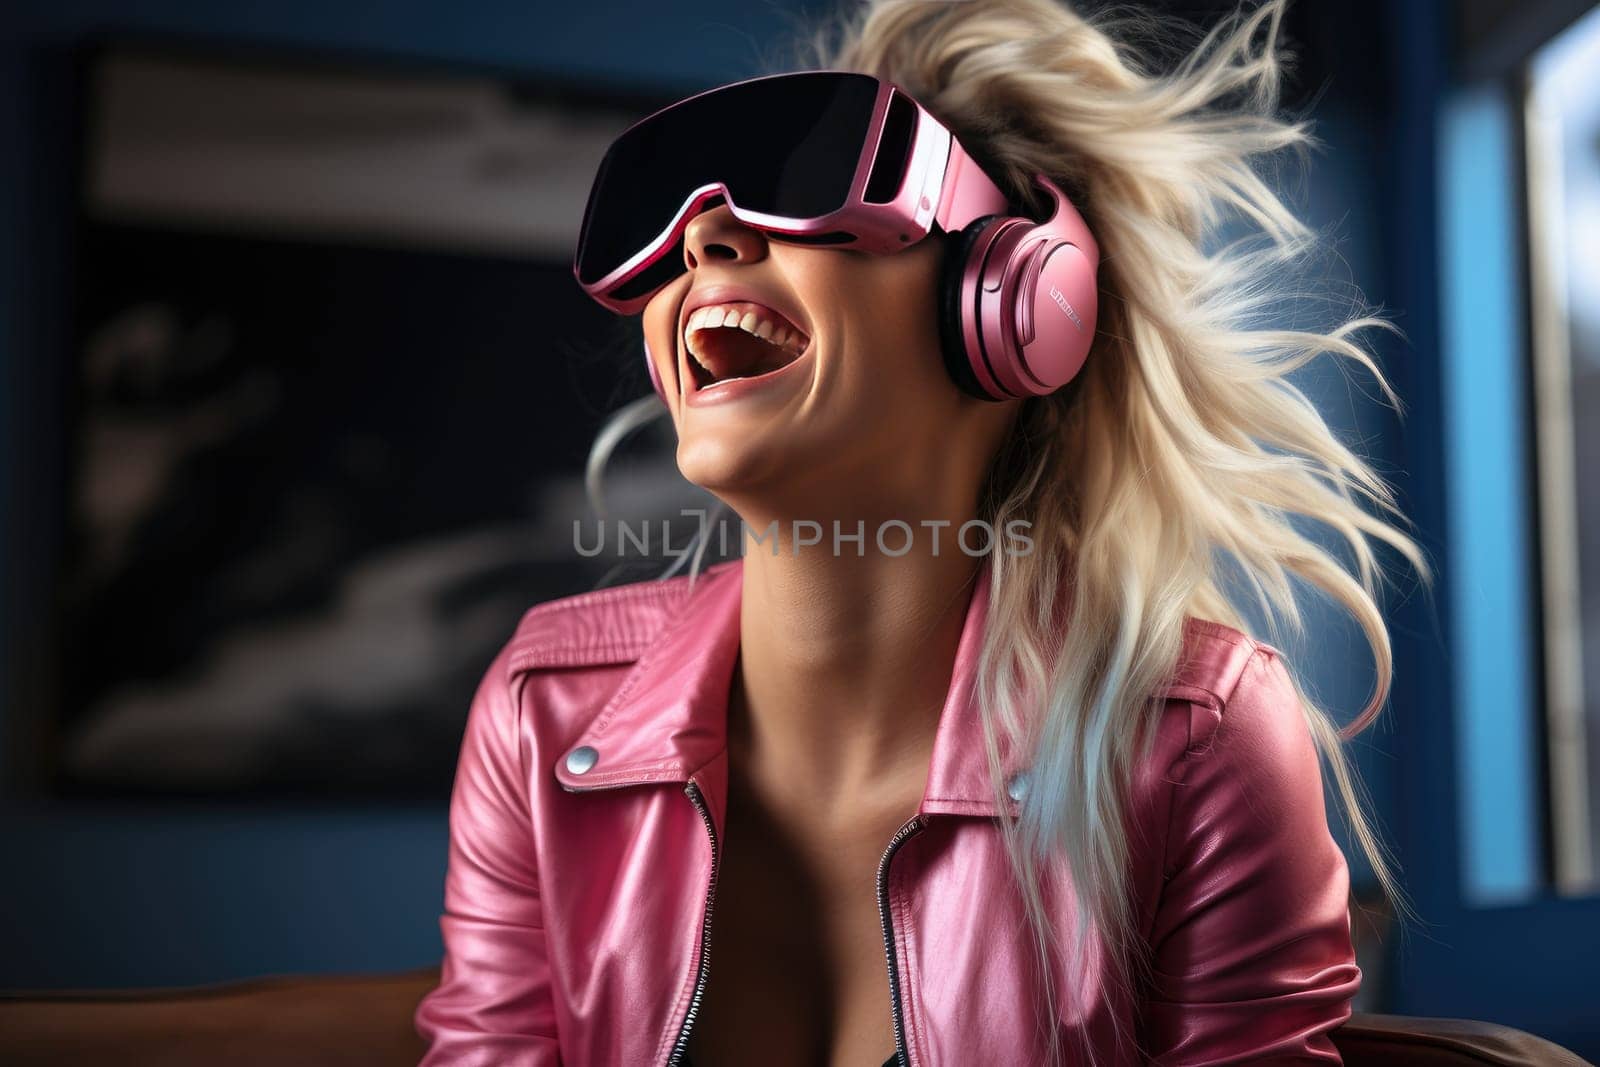 Virtual reality concept featuring a woman using an electronic amplification headset to engage in a digital simulation. Modern technology and futuristic innovation in entertainment.